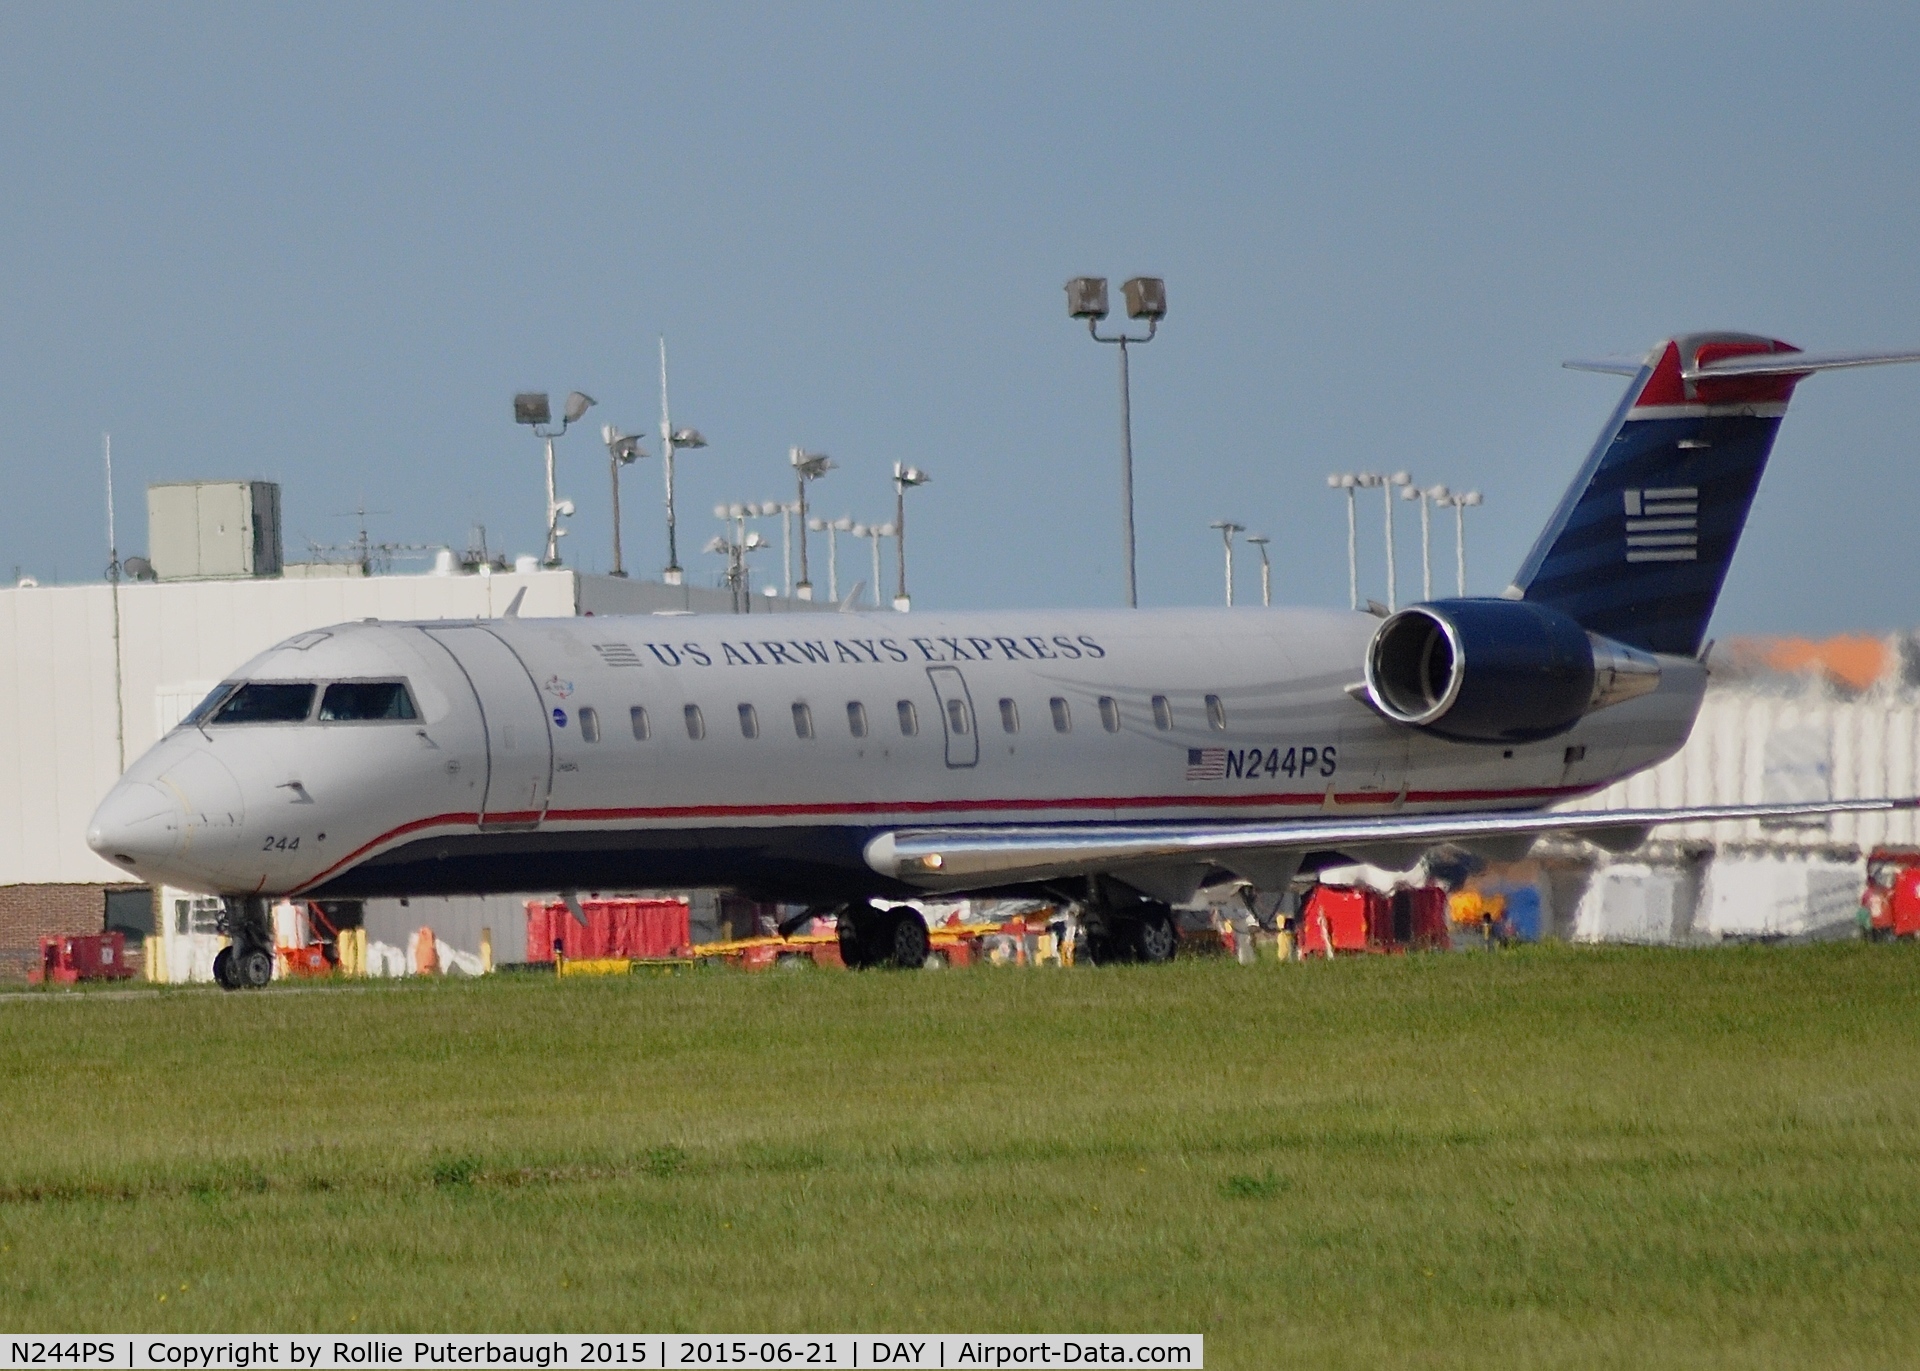 N244PS, 2004 Bombardier CRJ-200ER (CL-600-2B19) C/N 7912, PSA Airlines Canadair Regional Jet CRJ-200ER {N244PS}, operating as U.S Airways Express, heads towards Runway 24 Left at the Dayton International Airport {DAY} bound for the Charlotte/Douglas International Airport on June 21, 2015.